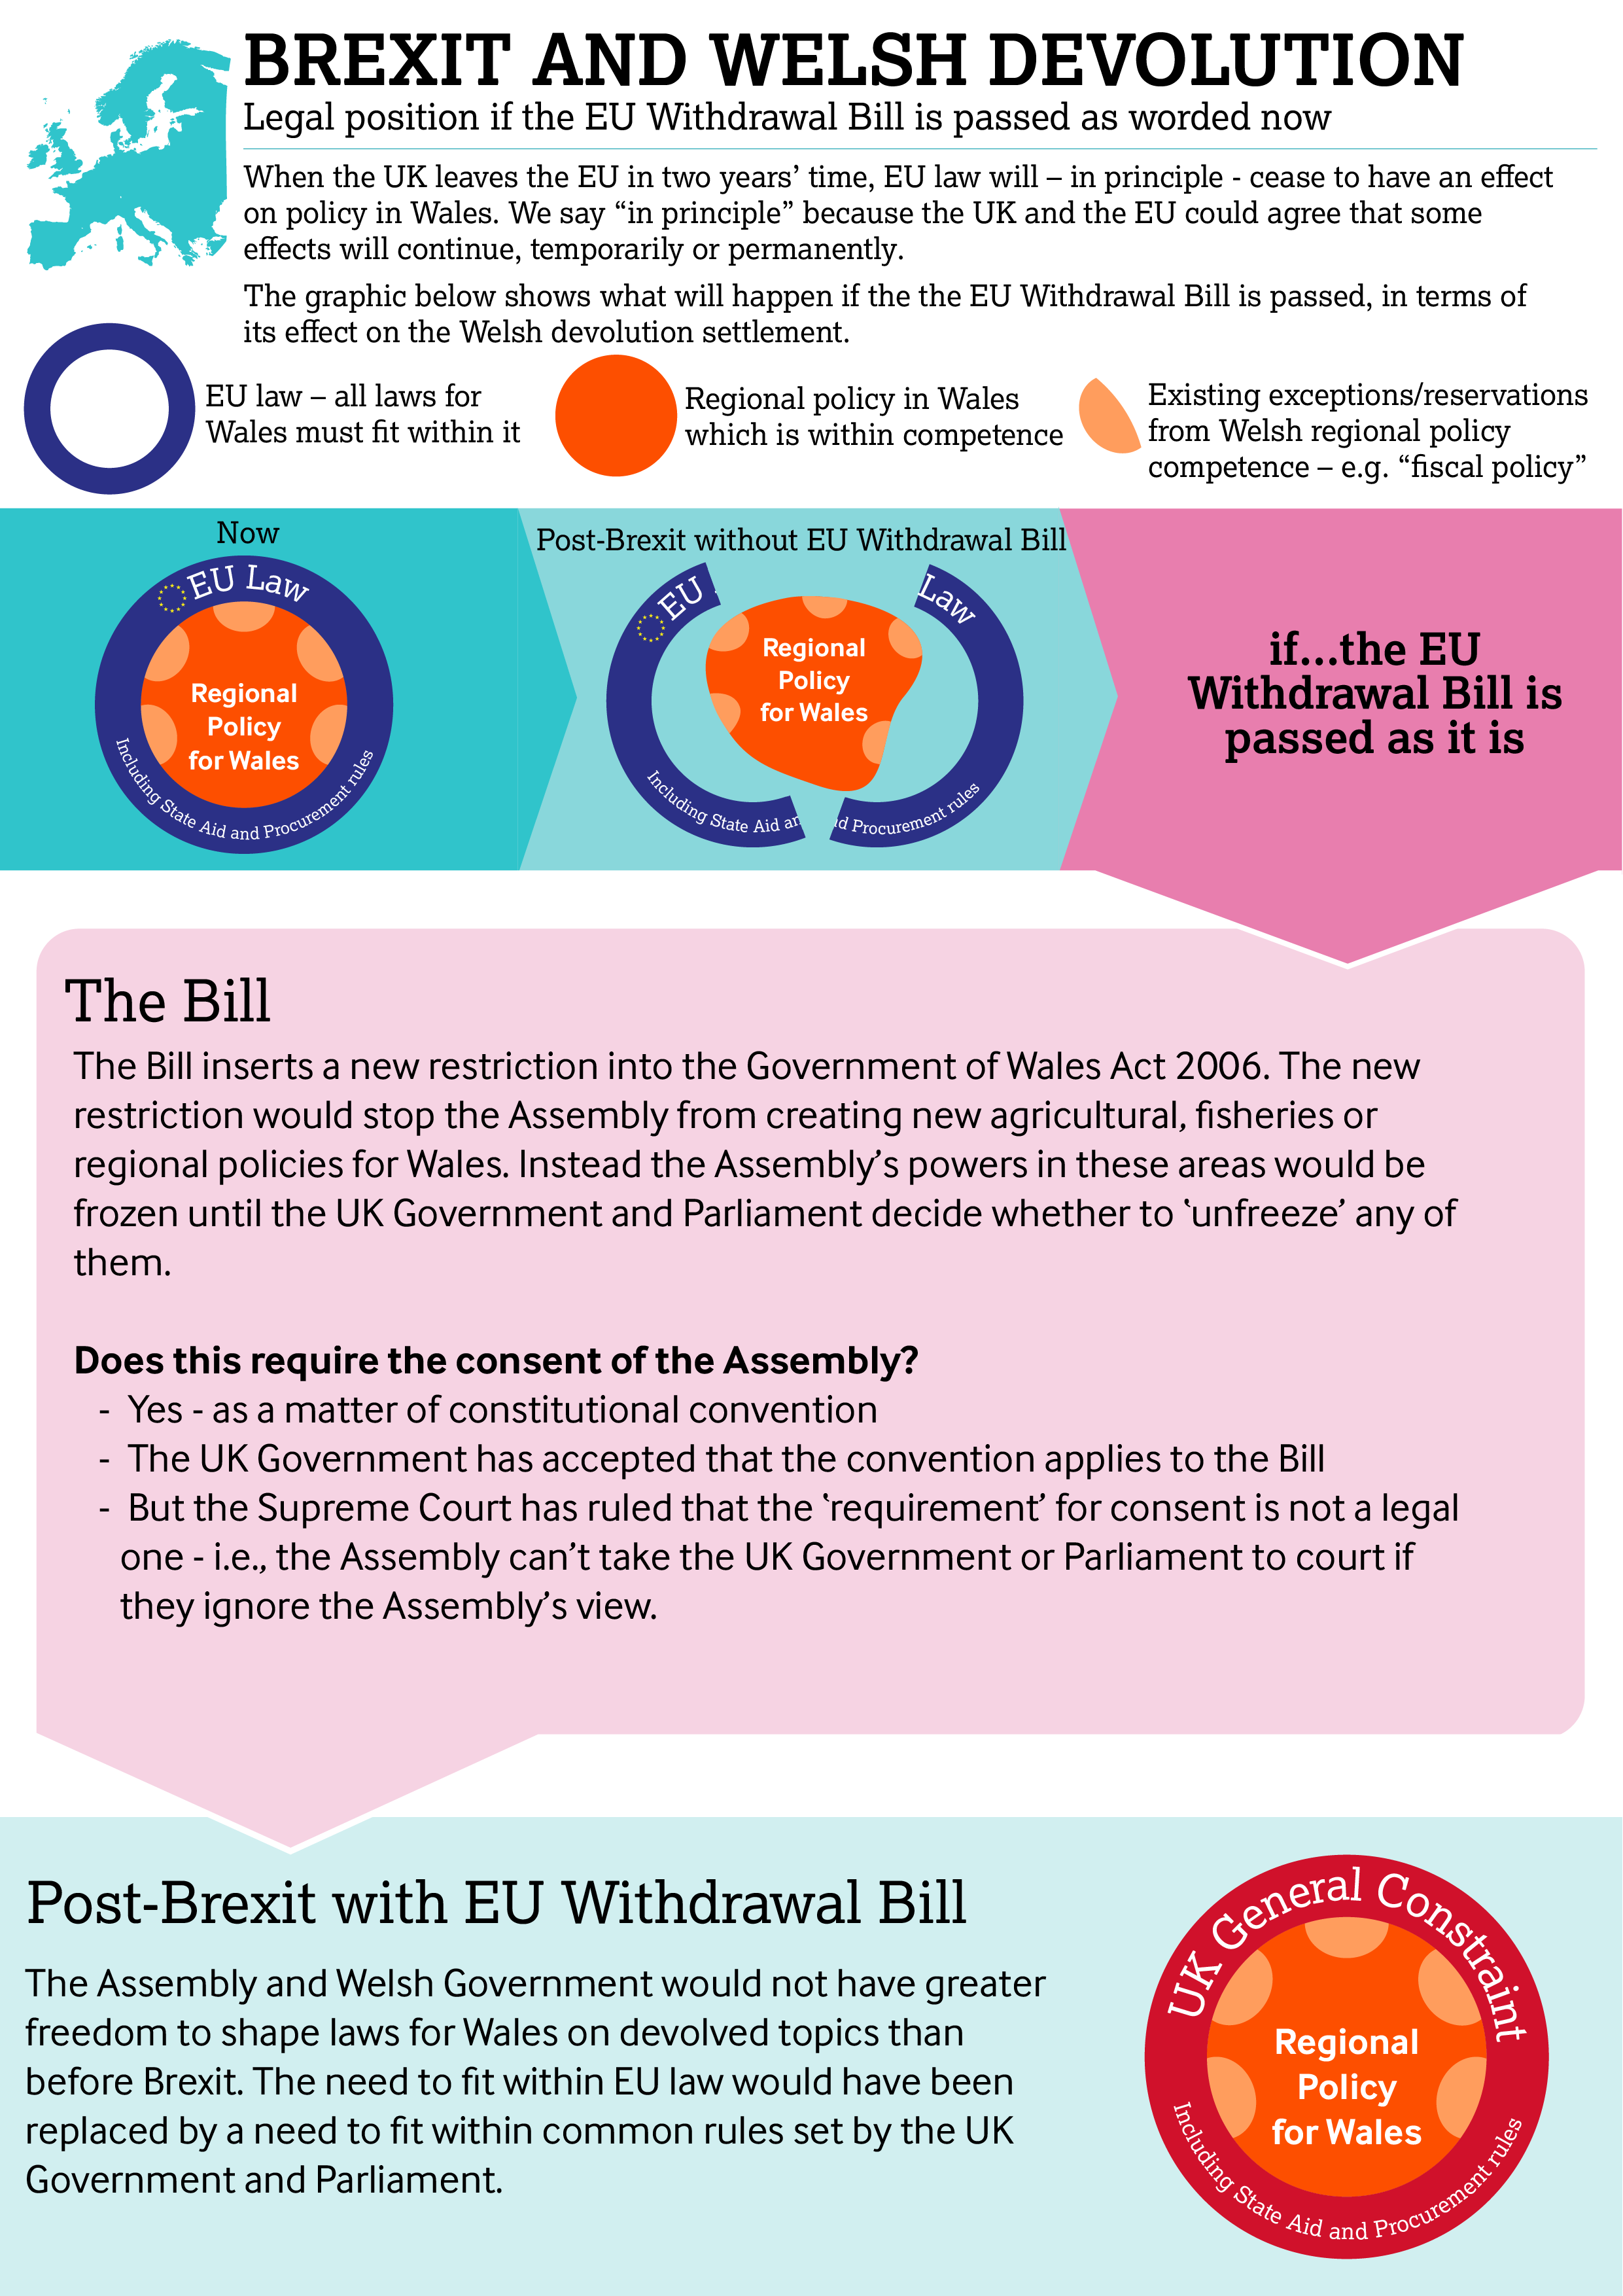 Series of infographics that set out how the EU Withdrawal Bill may impact on devolution. The infographics are described in the text of the blog